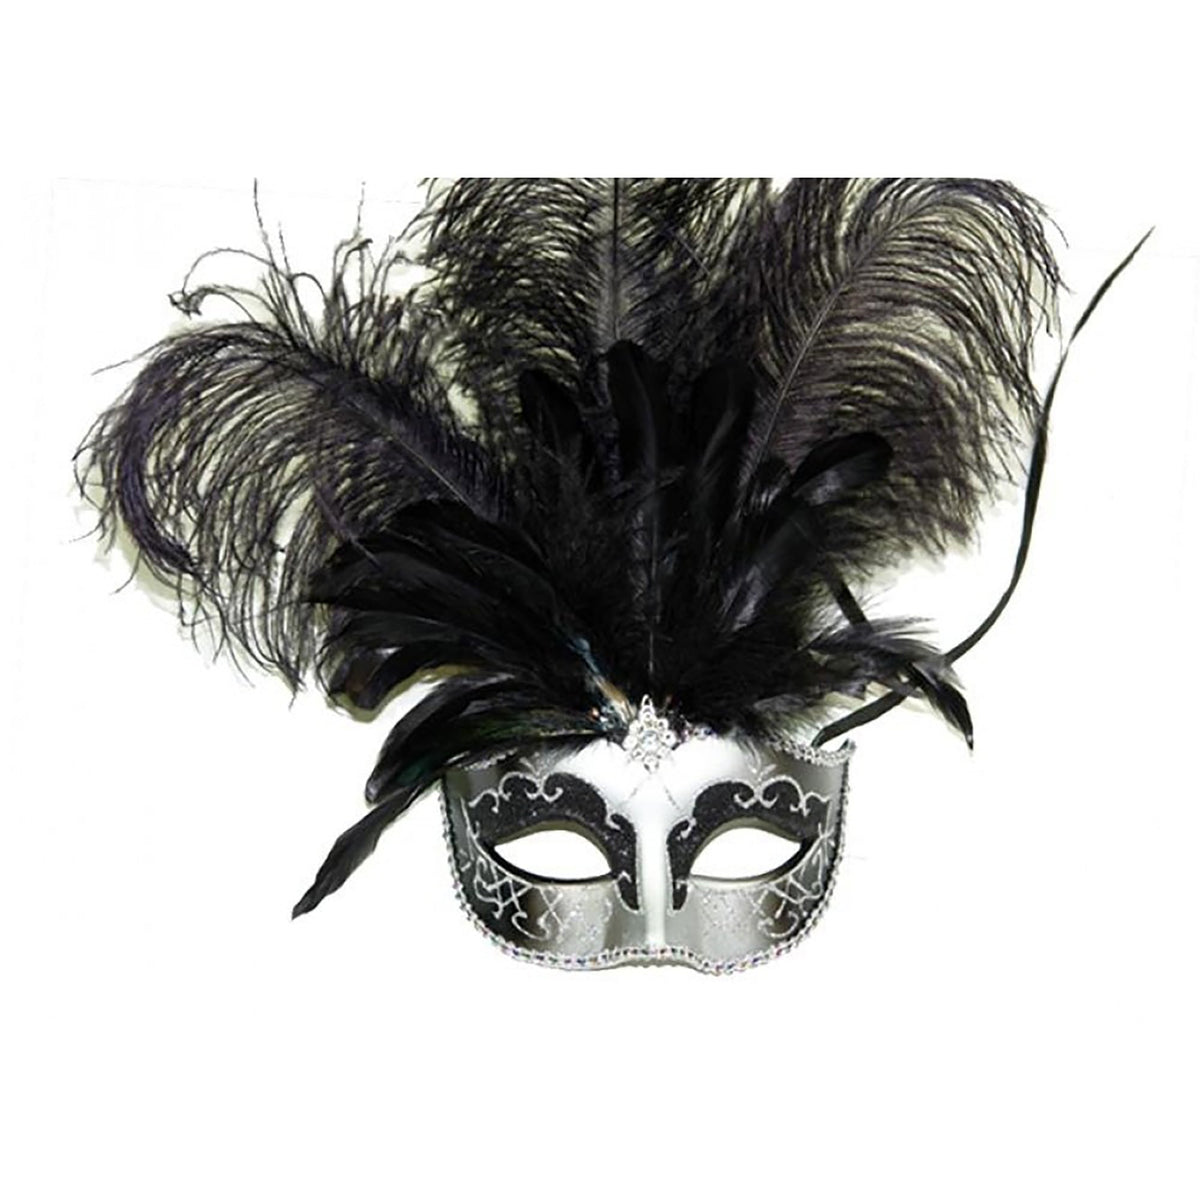 KBW GLOBAL CORP Costume Accessories Silver and Black Venetian Mask with Ostrich Feathers, 1 Count 831687011412